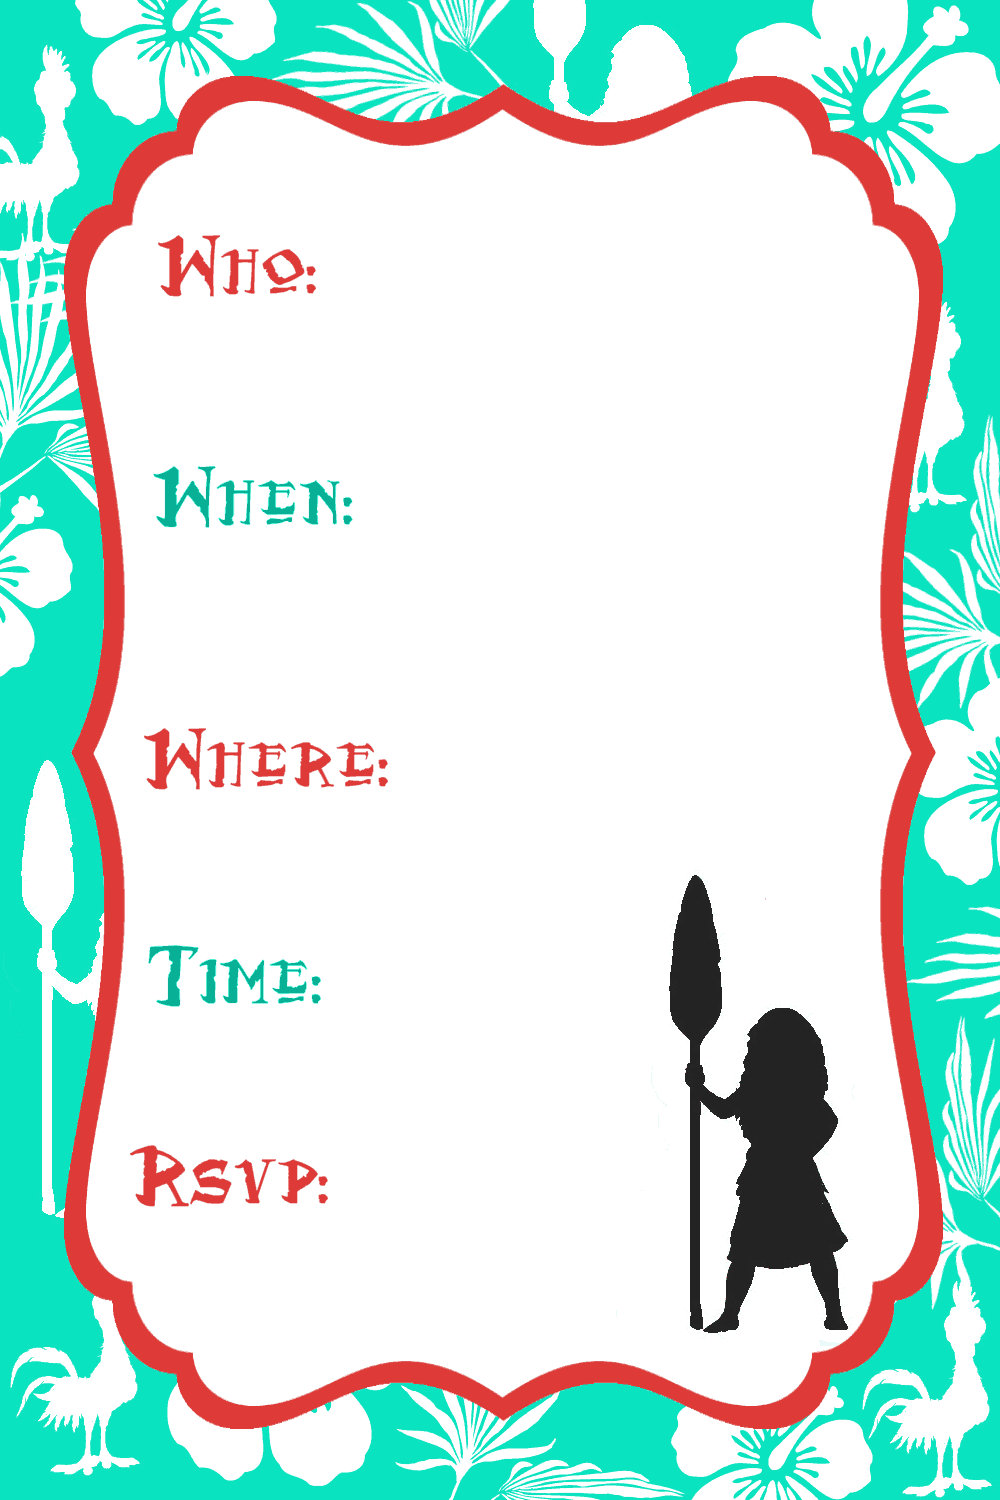 Moana Inspired Printable Party